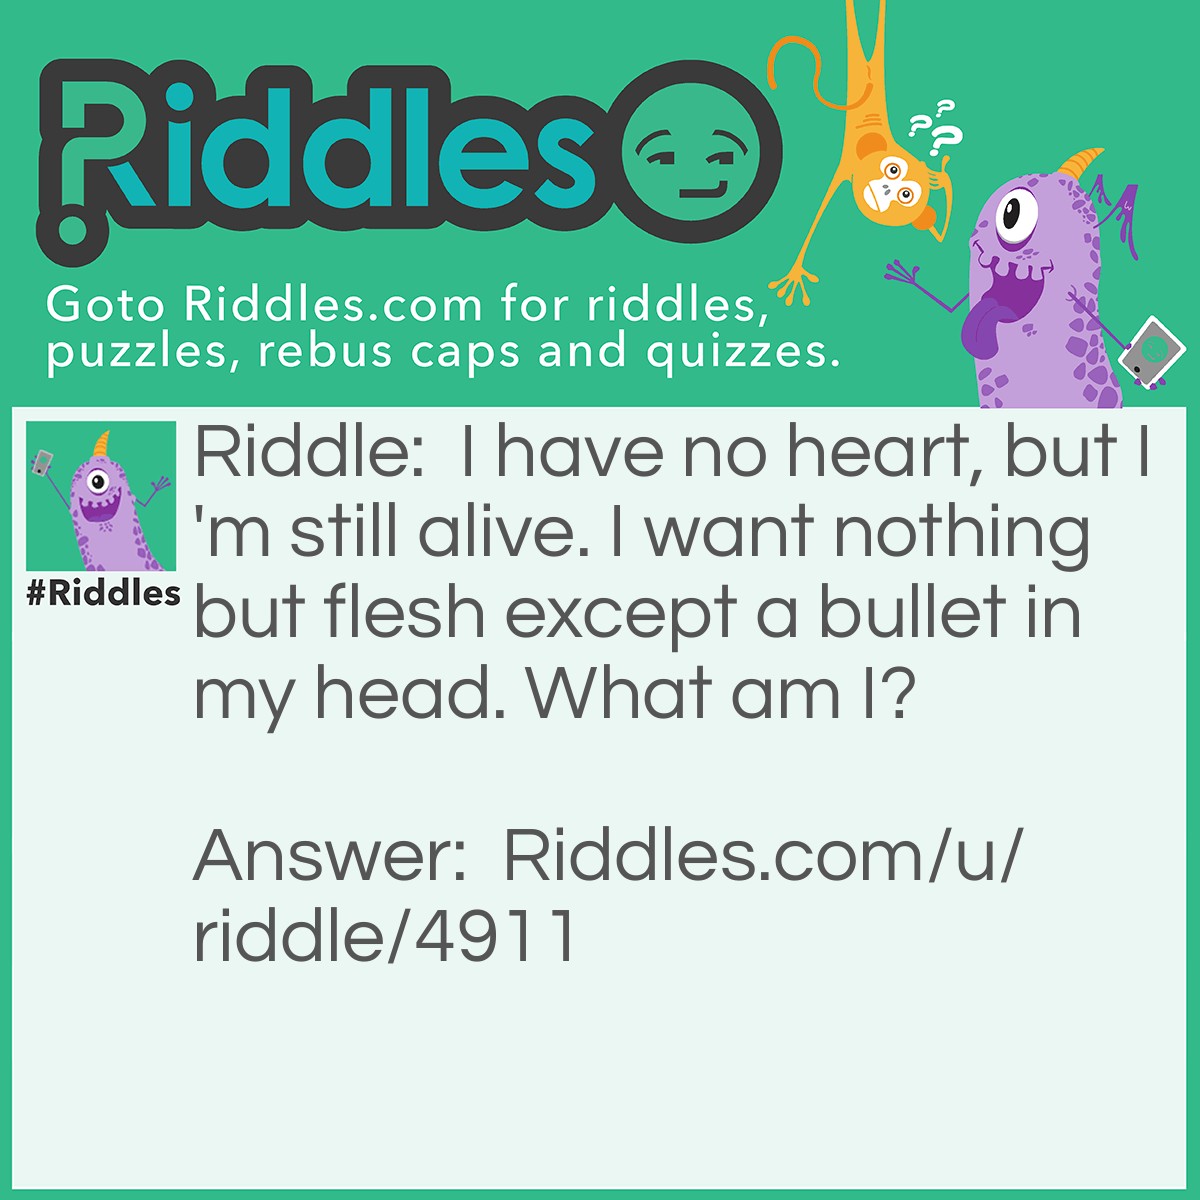 Riddle: I have no heart, but I'm still alive. I want nothing but flesh except a bullet in my head. What am I? Answer: Zombie.